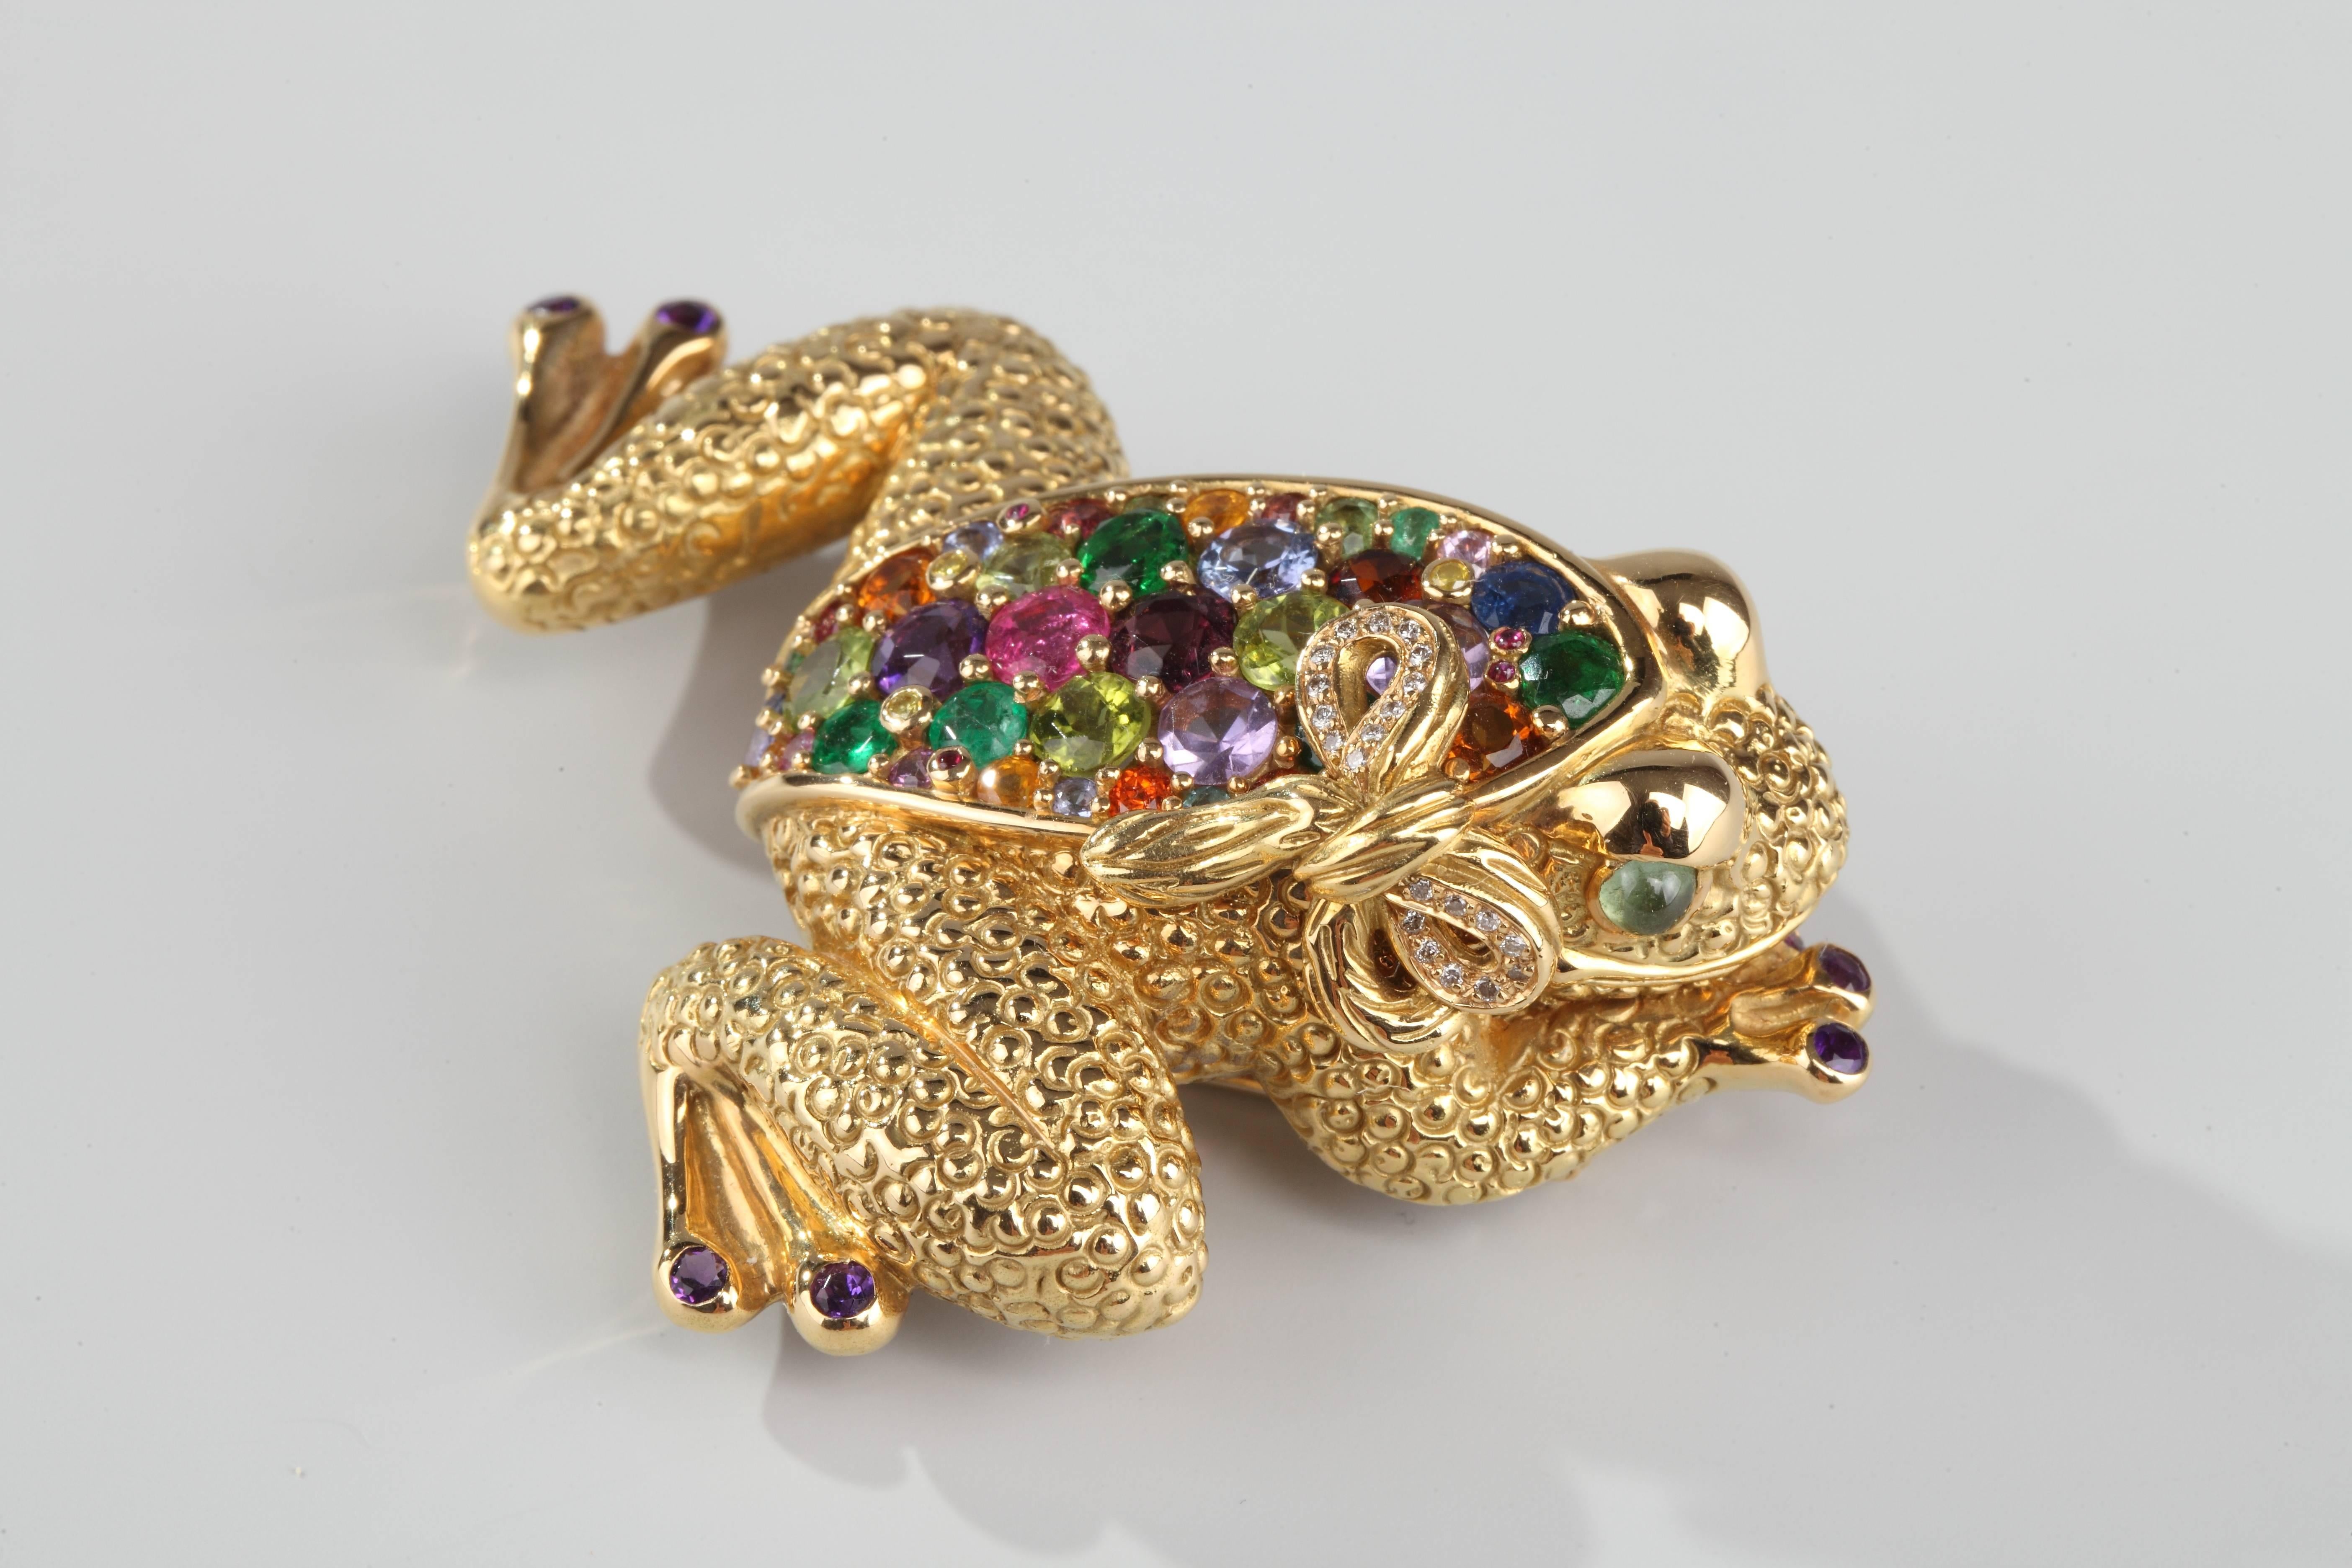 In yellow gold, realistic brooch representing a frog, set with a multitude of precious and fine stones, as amethyst, sapphire, green garnet, tourmaline, peridot, etc....
Signed Eva Segoura.
